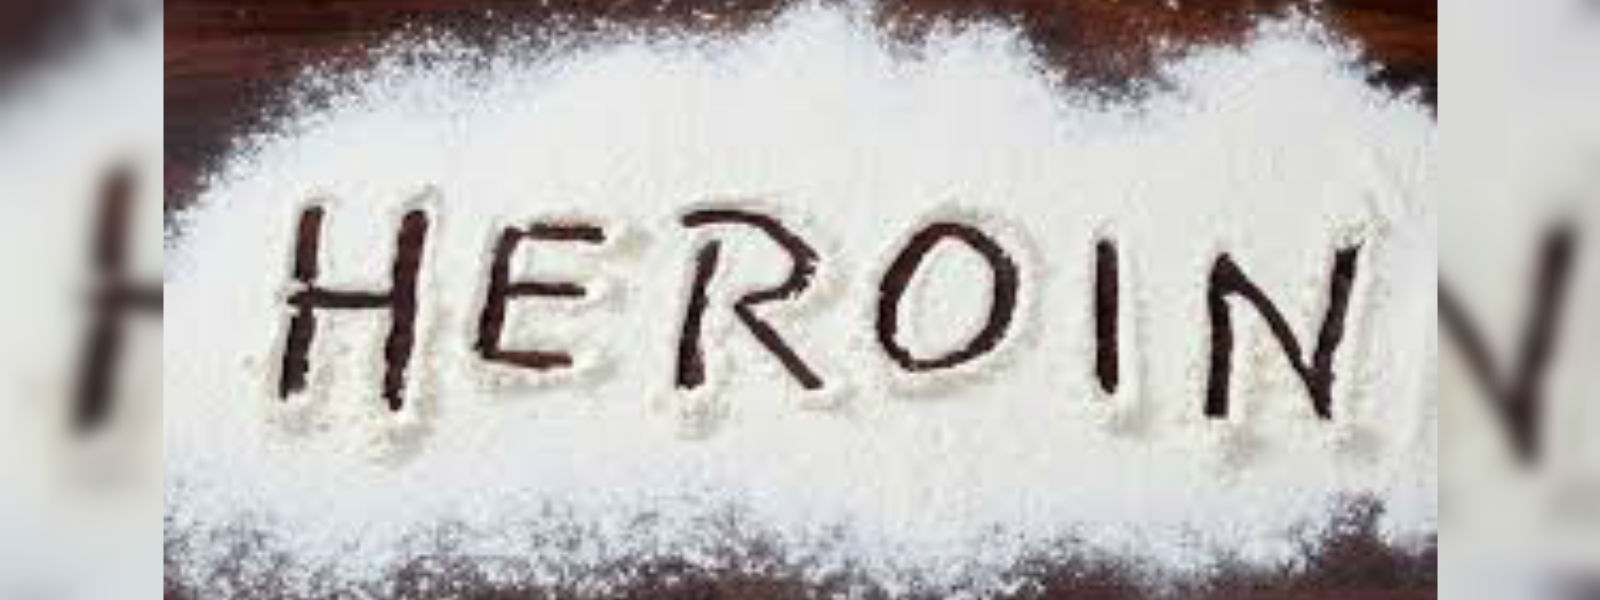 Pakistani arrested with 2.85 kilos of heroin